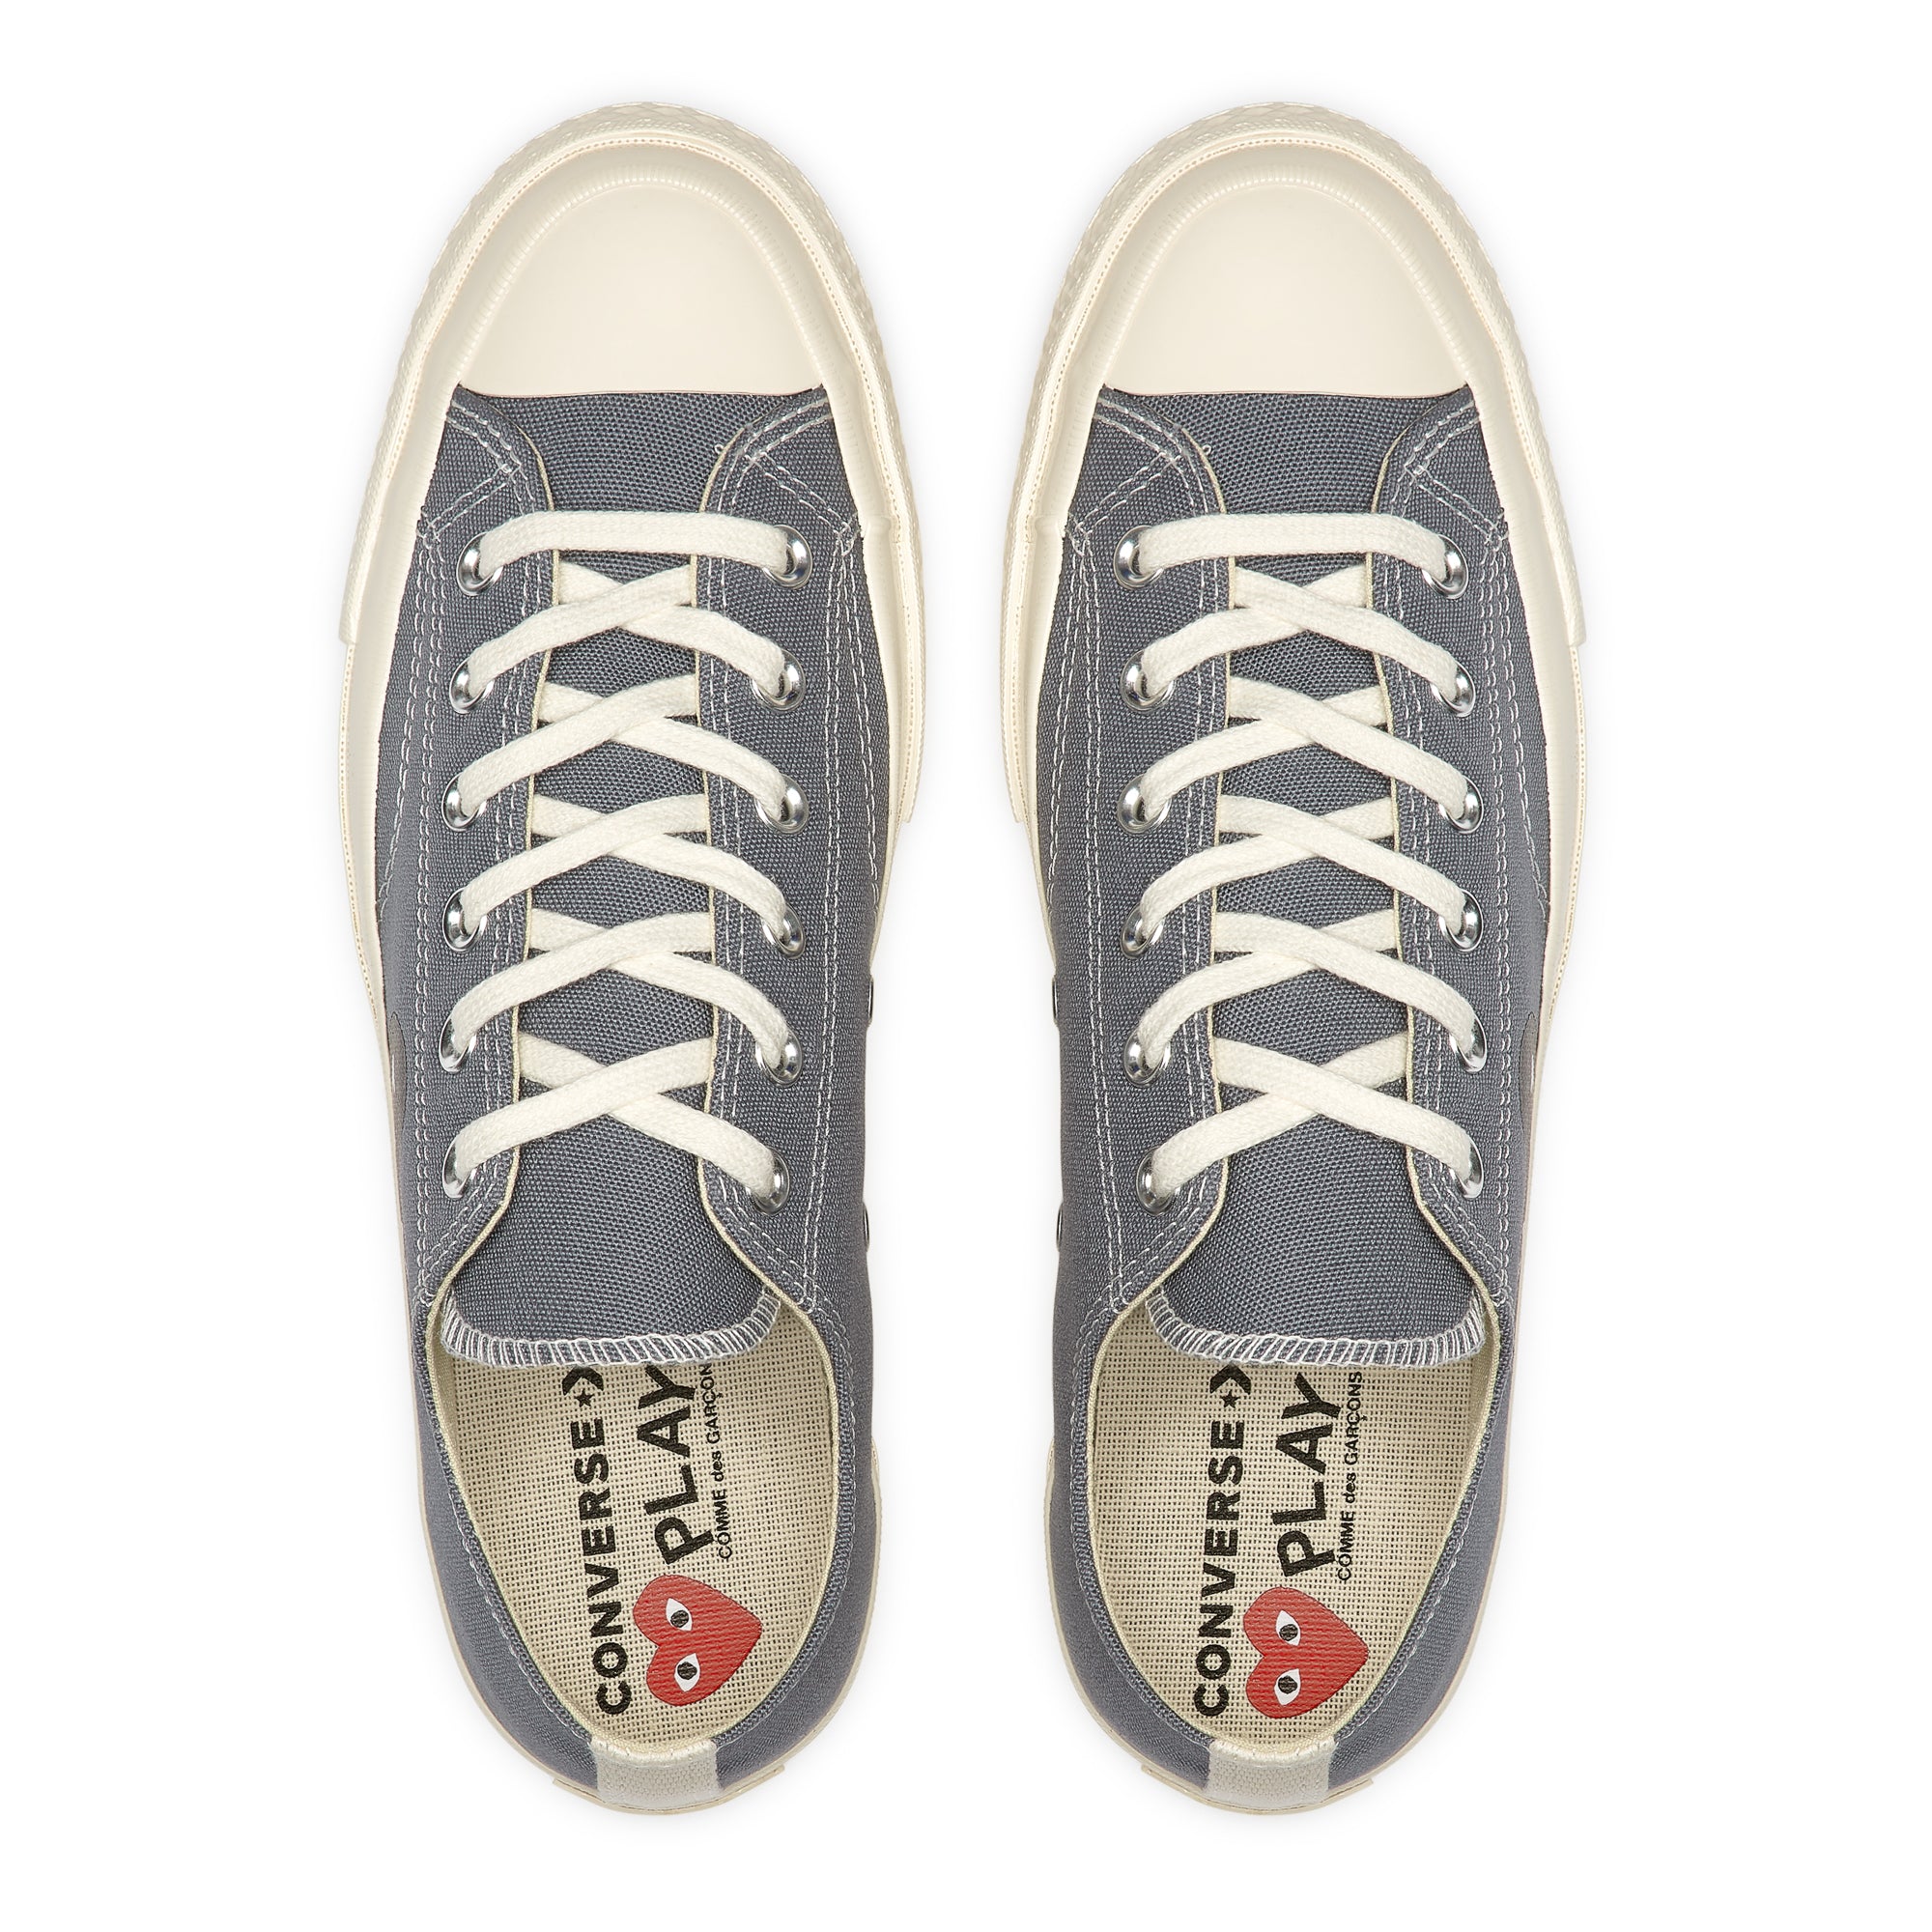 Play Converse - Black Heart Chuck Taylor All Star ’70 Low Sneakers - (Grey) view 5